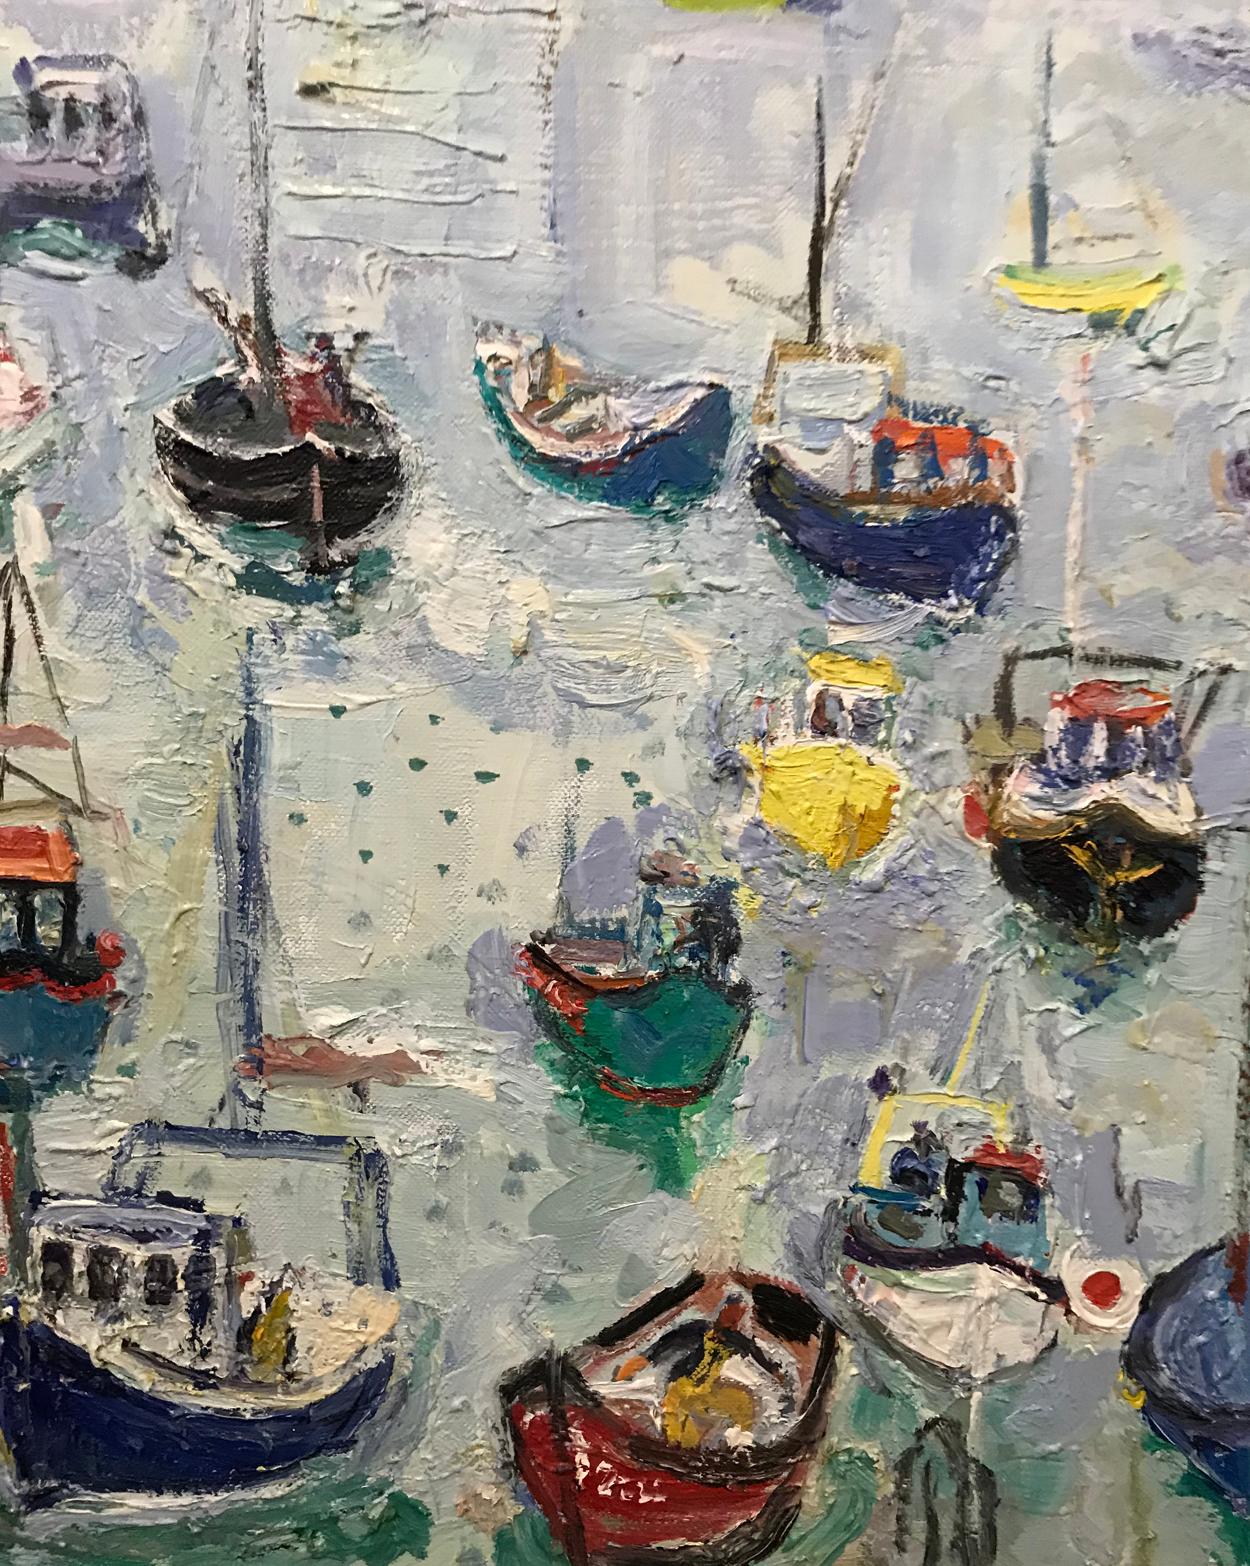 Linda Weir 'English', St Ives Harbour Cornwall, Oil on Canvas, Painted in 2006 4